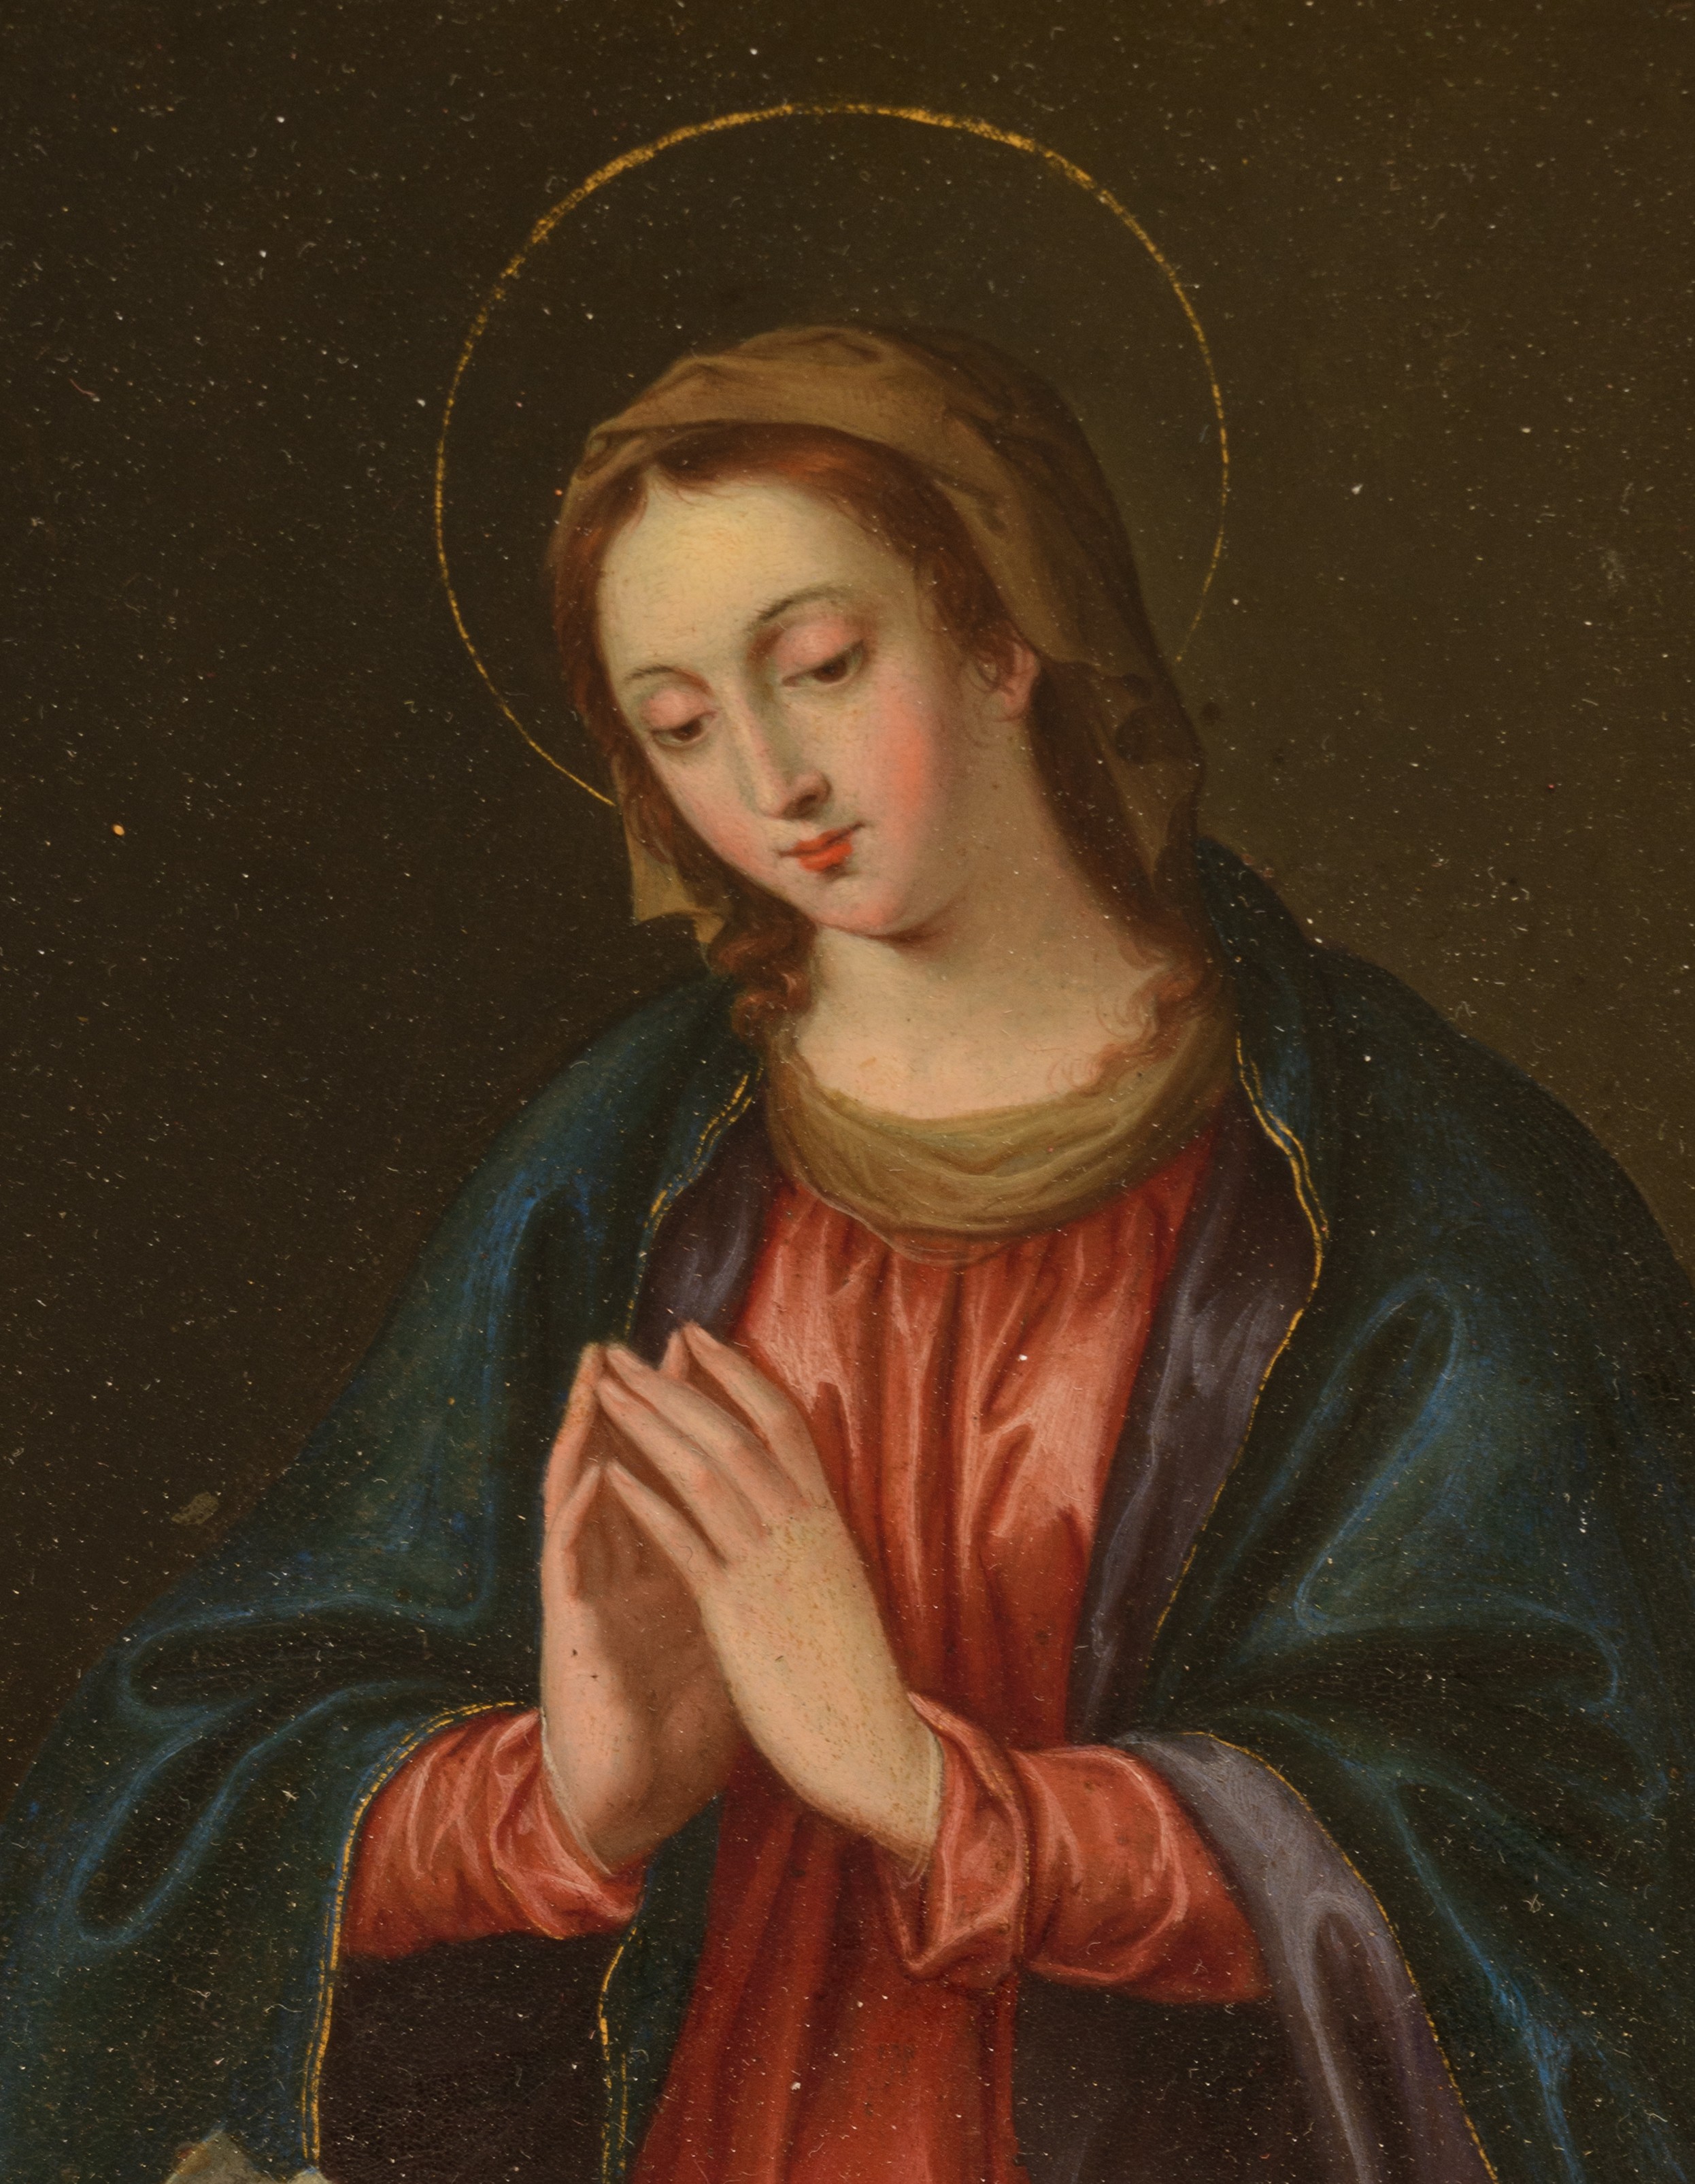 The Holy Madonna praying, probably 17thC, oil on copper, 13,5 x 18 cm - Image 5 of 14